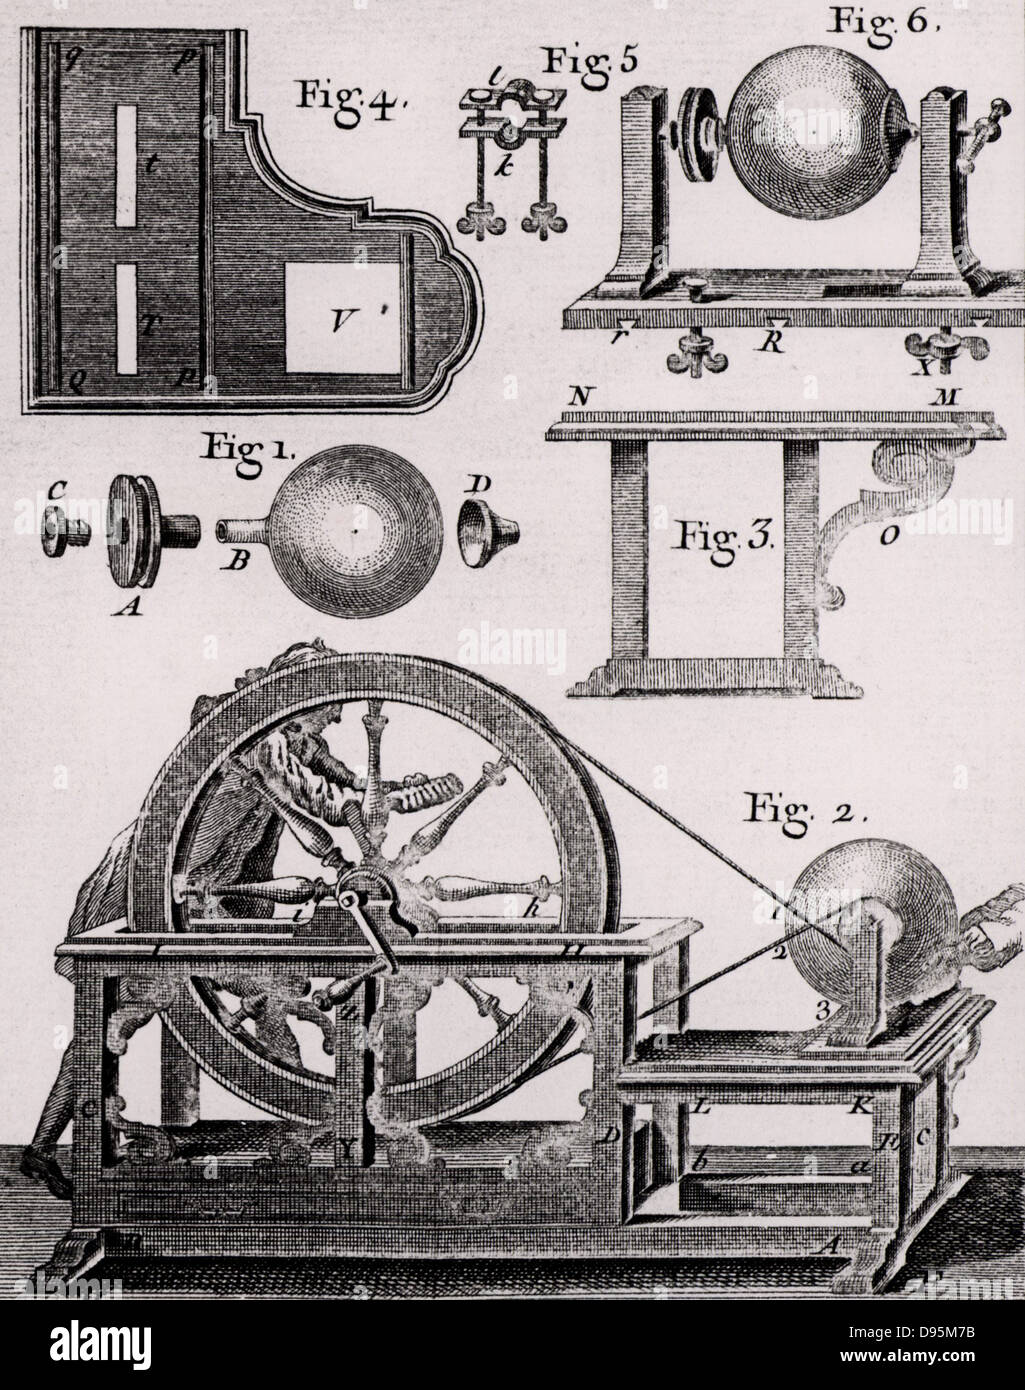 Glass globe static electric machine. Figure 2 shows the wheel of the machine being turned to produce electricity by friction on the glass globe.  The other figures are the glass globe and its mounts.  From 'Recherches sur les Causes Particulaires des Phenomenes Electriques' by Abbe Nollet (Paris, 1753). Engraving. Stock Photo